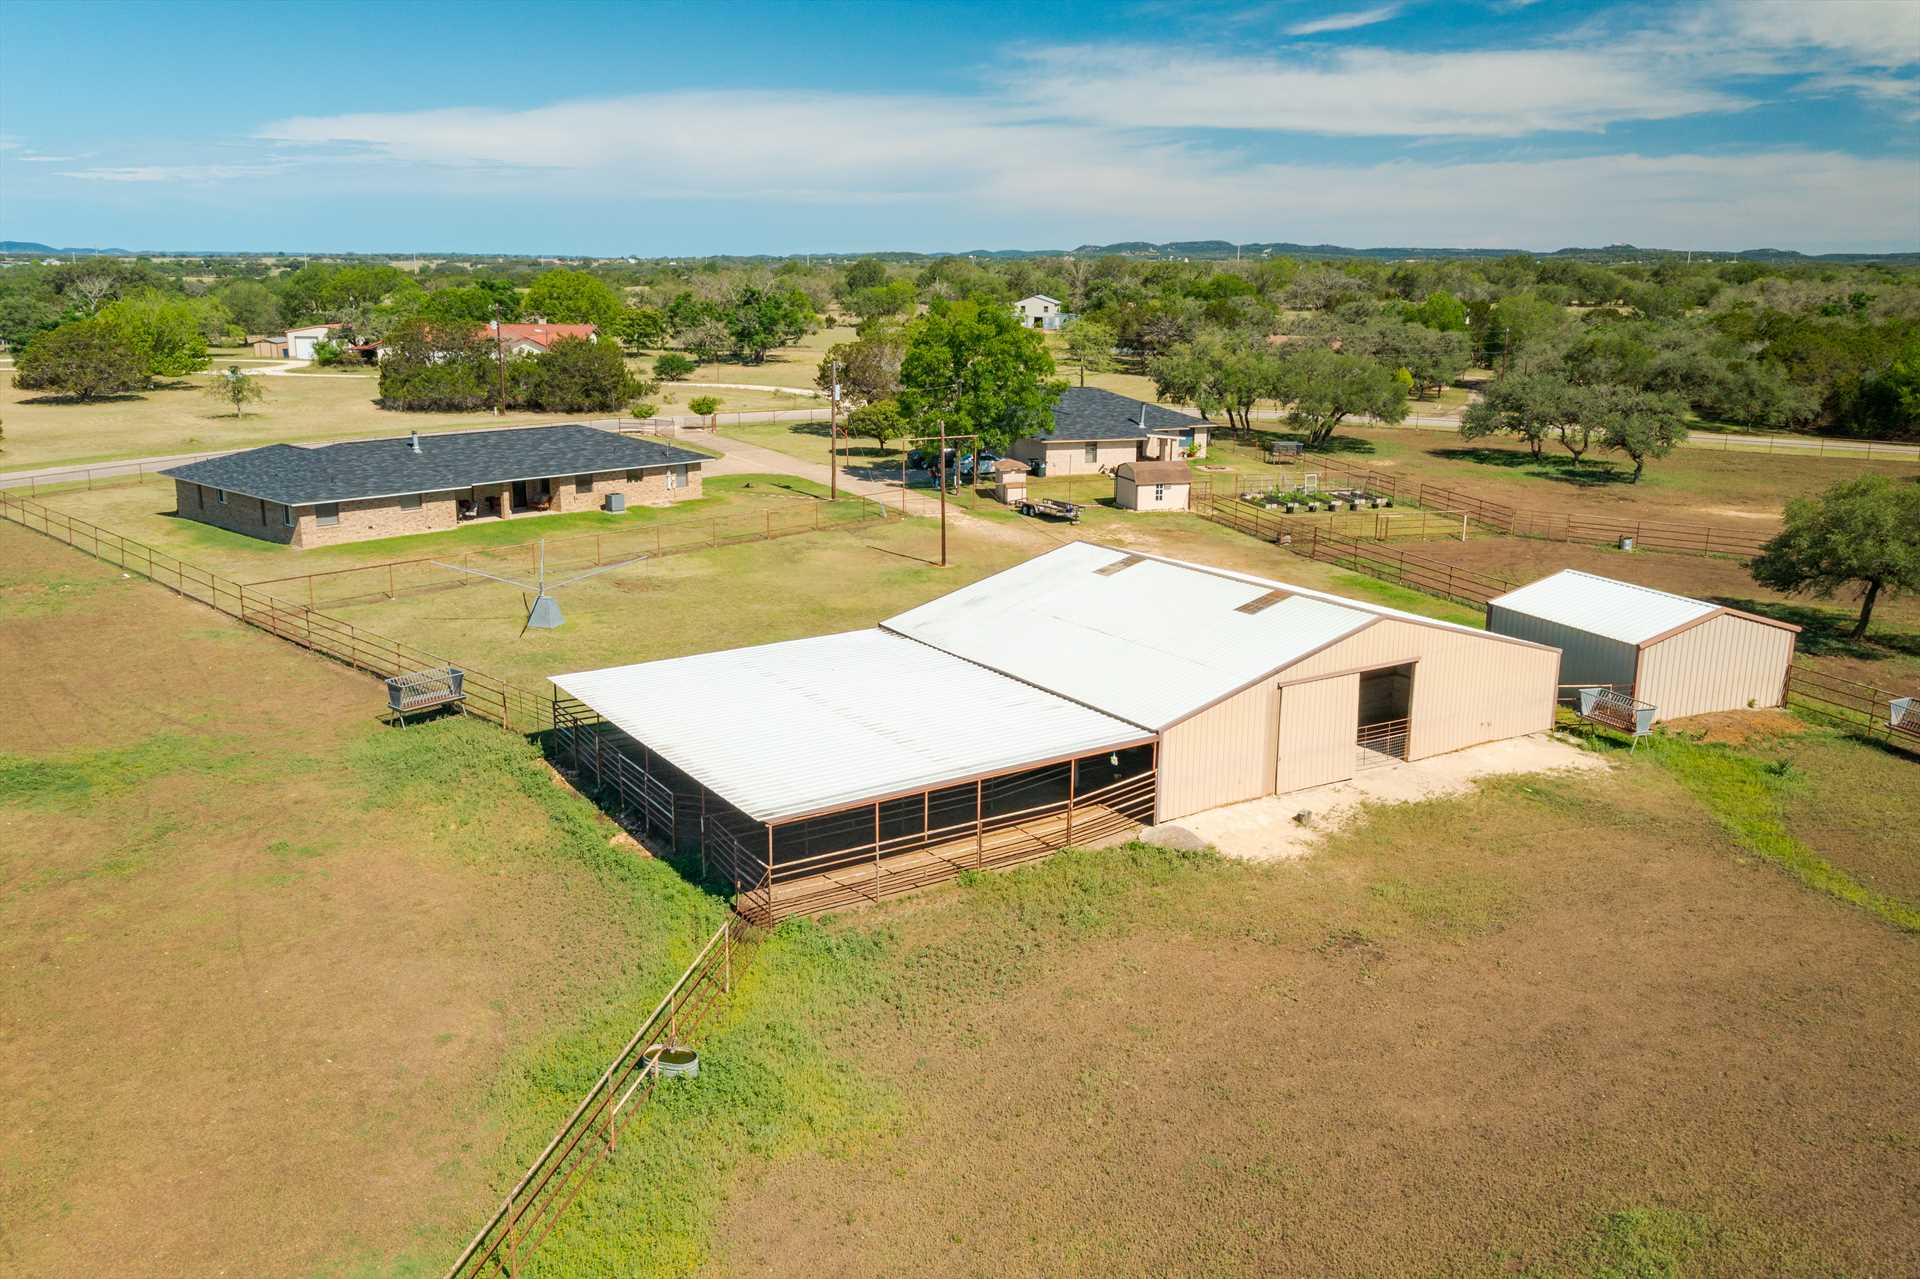                                                 Ten sprawling acres of beautiful countryside are yours to explore at the Roulette Ranch!